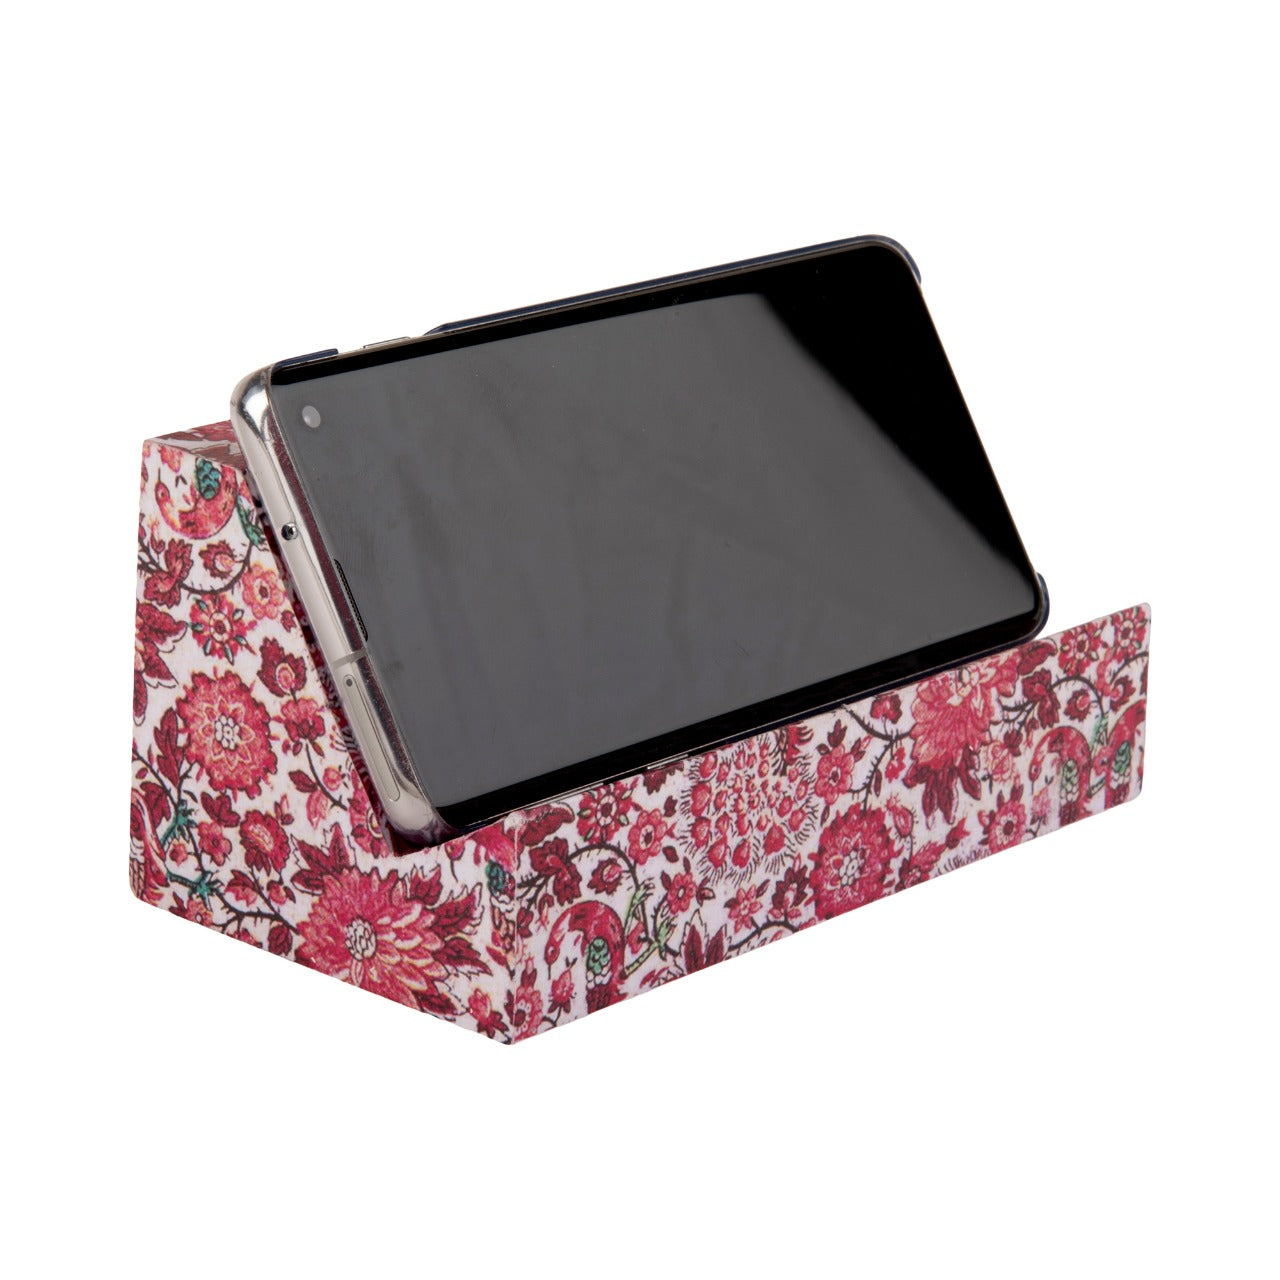 A Tiny Mistake Red Spring Floral Phone Stand for Charging and Watching Videos